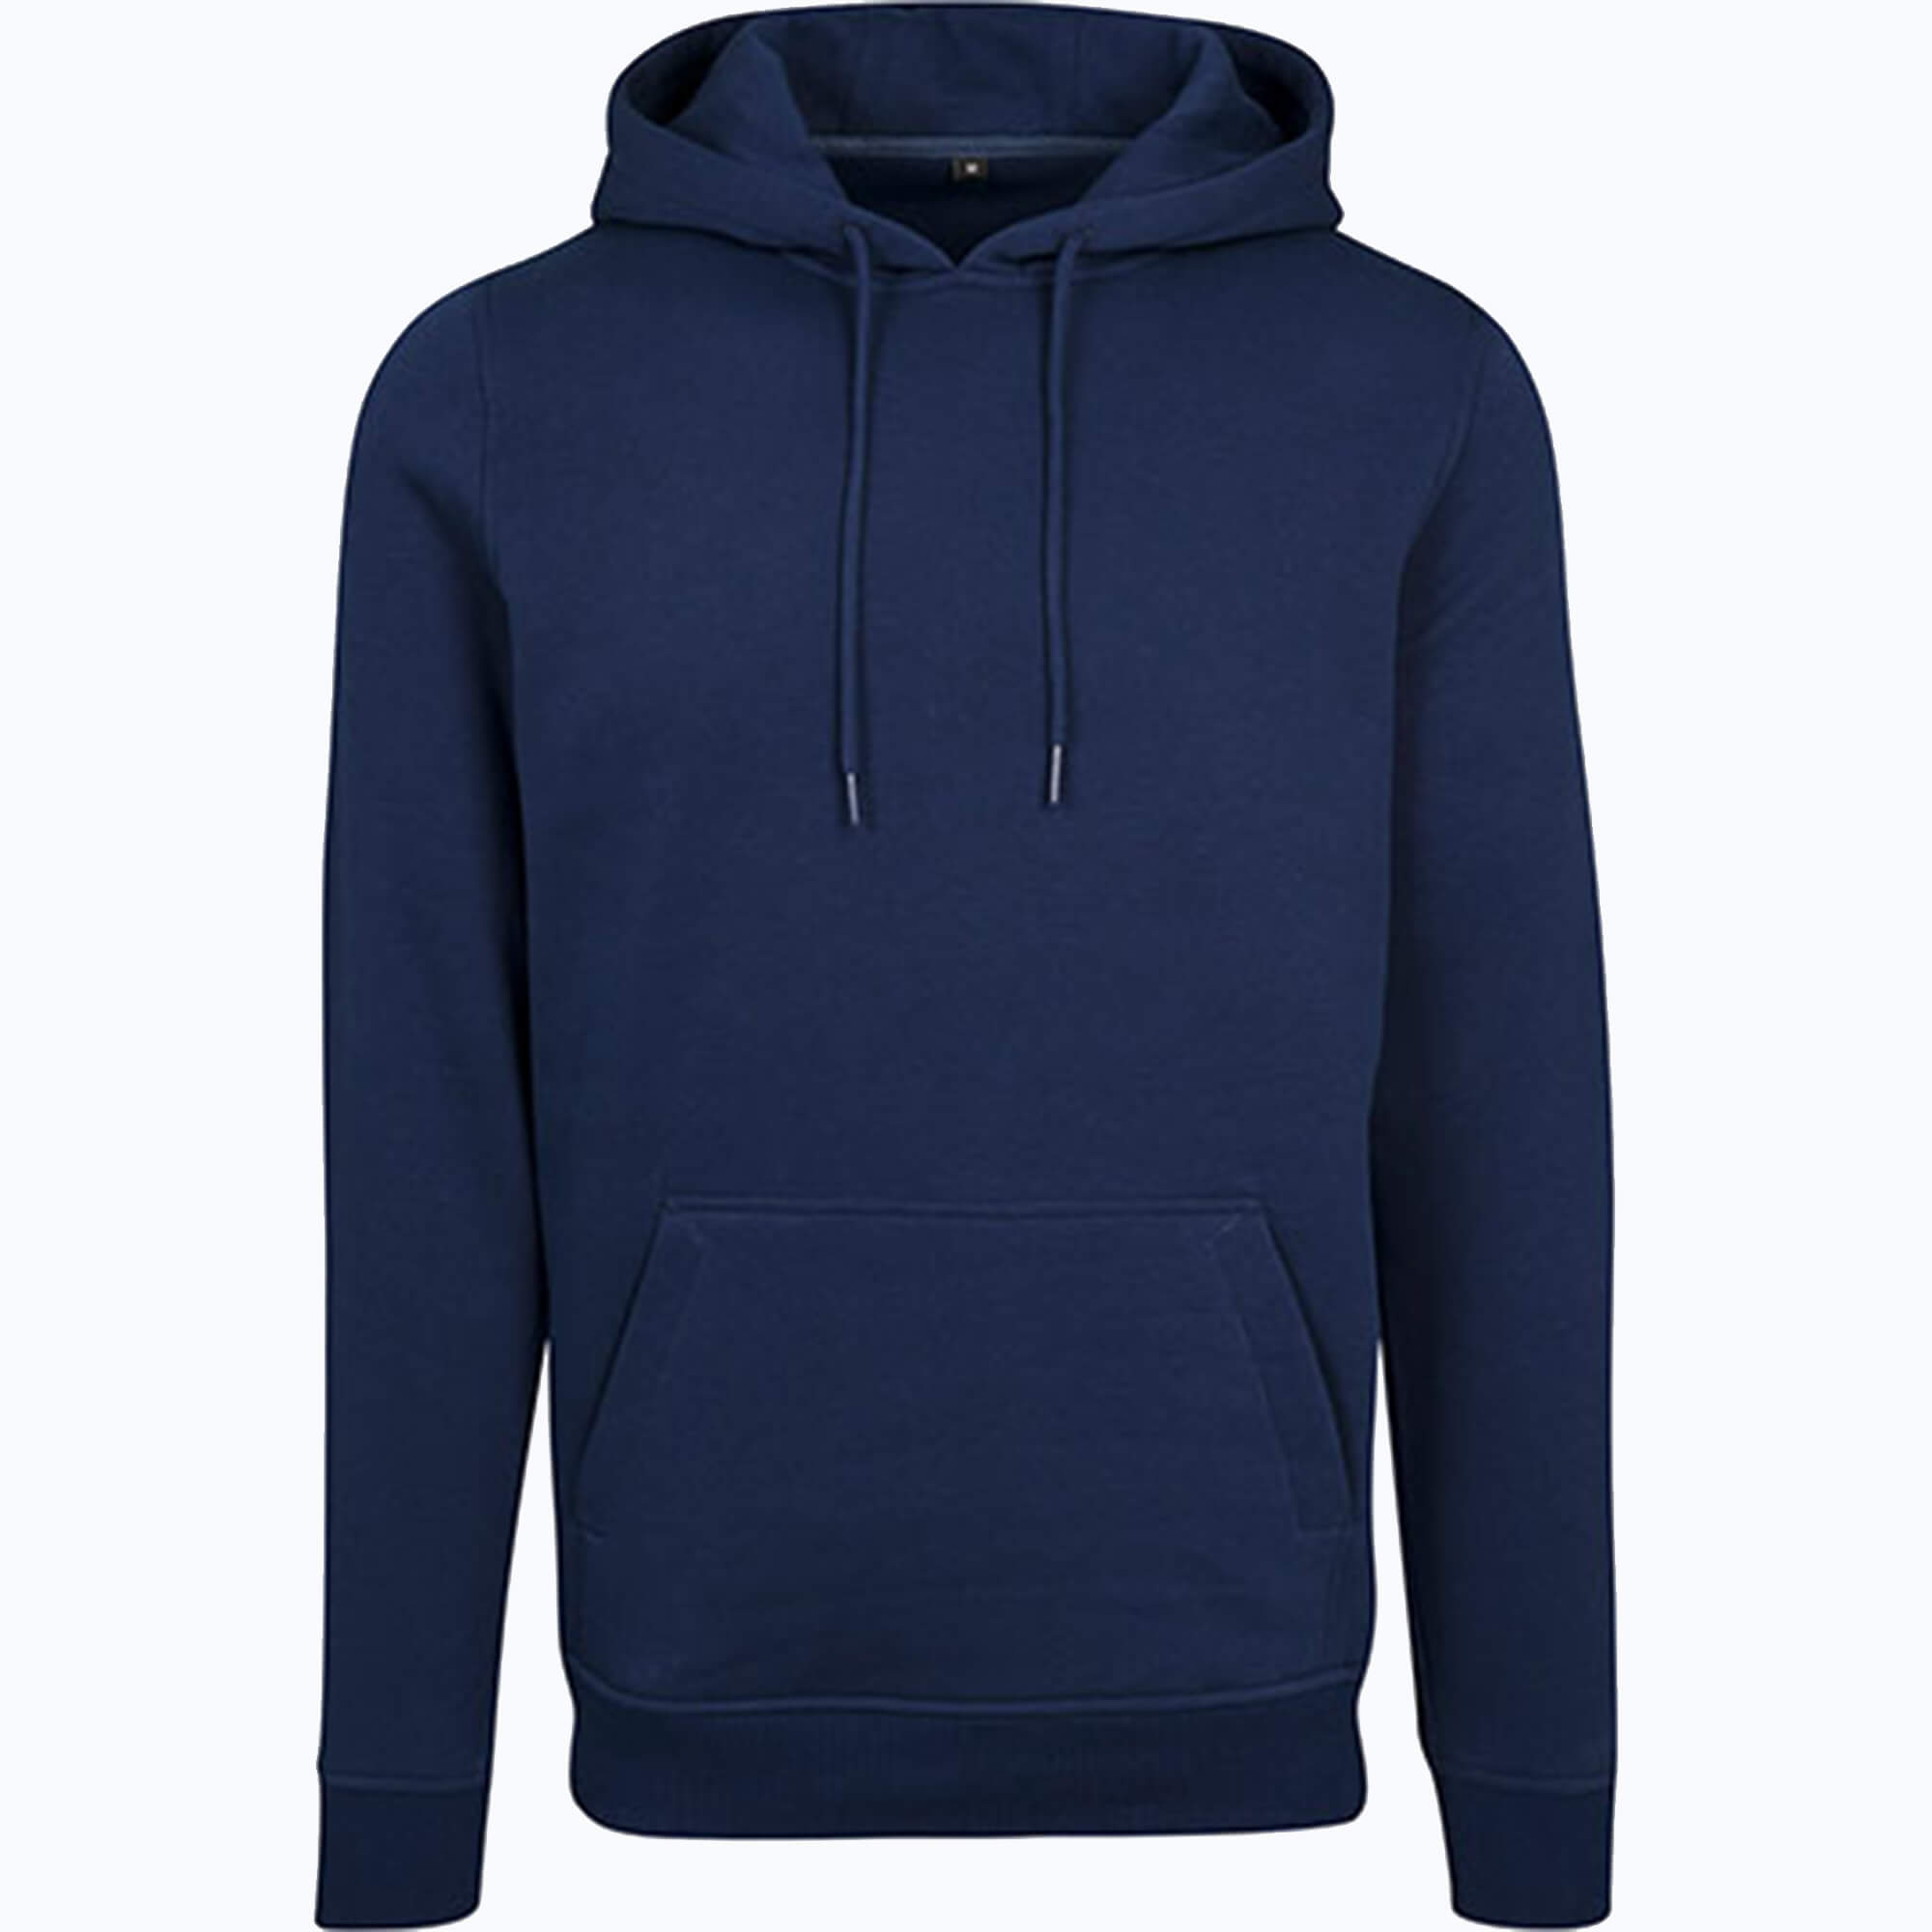 Build Your Brand Heavy Hoody Light Navy XL (BY011)